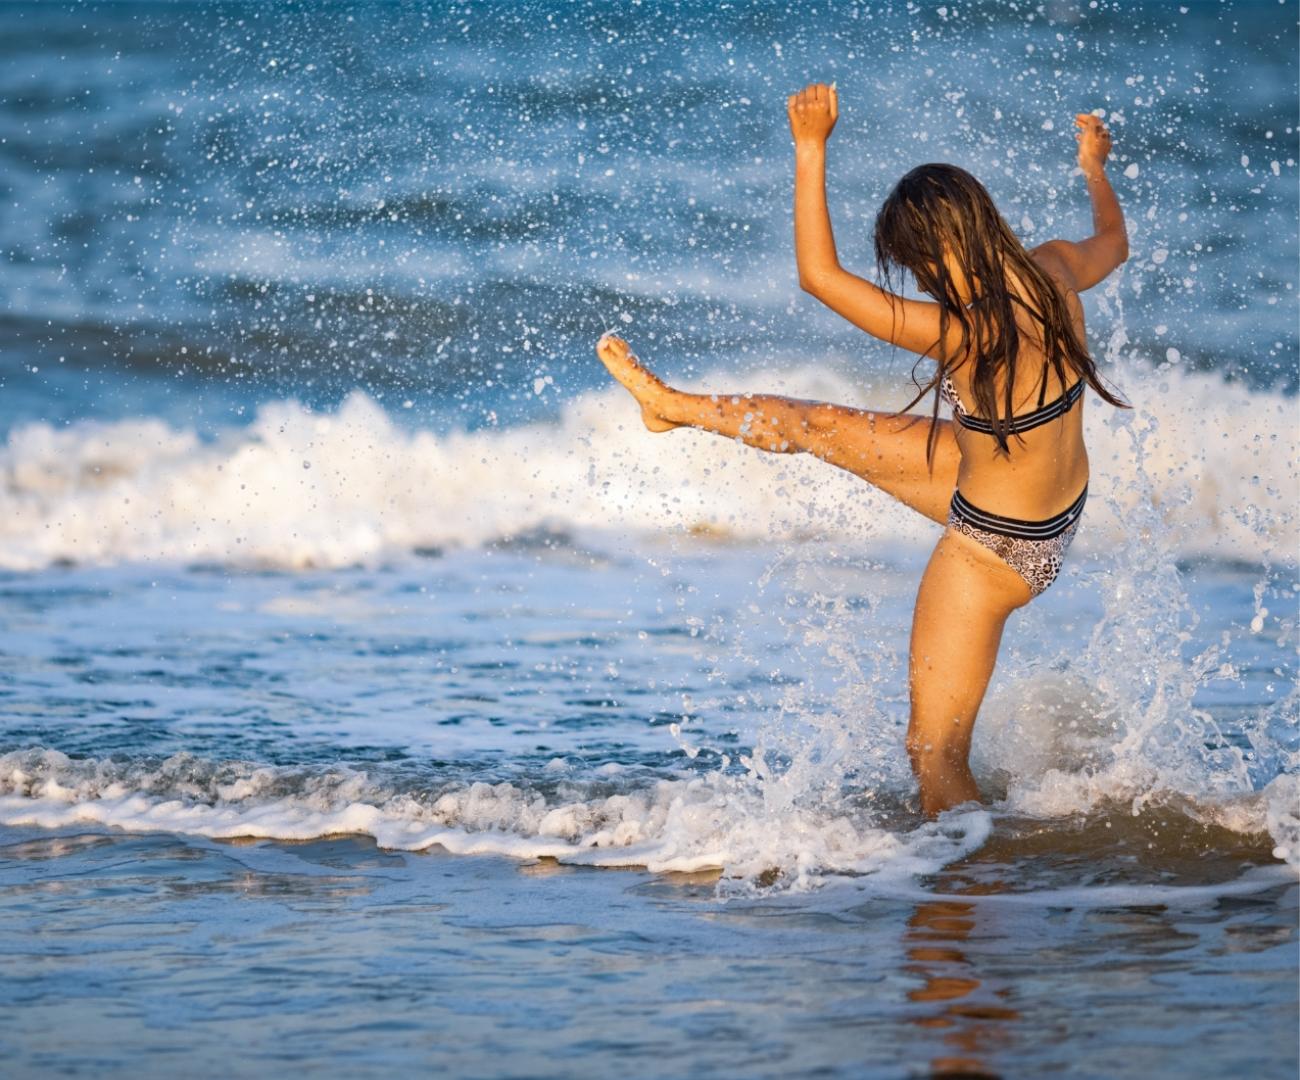 A girl plays in the water at the beach, lifting one leg.